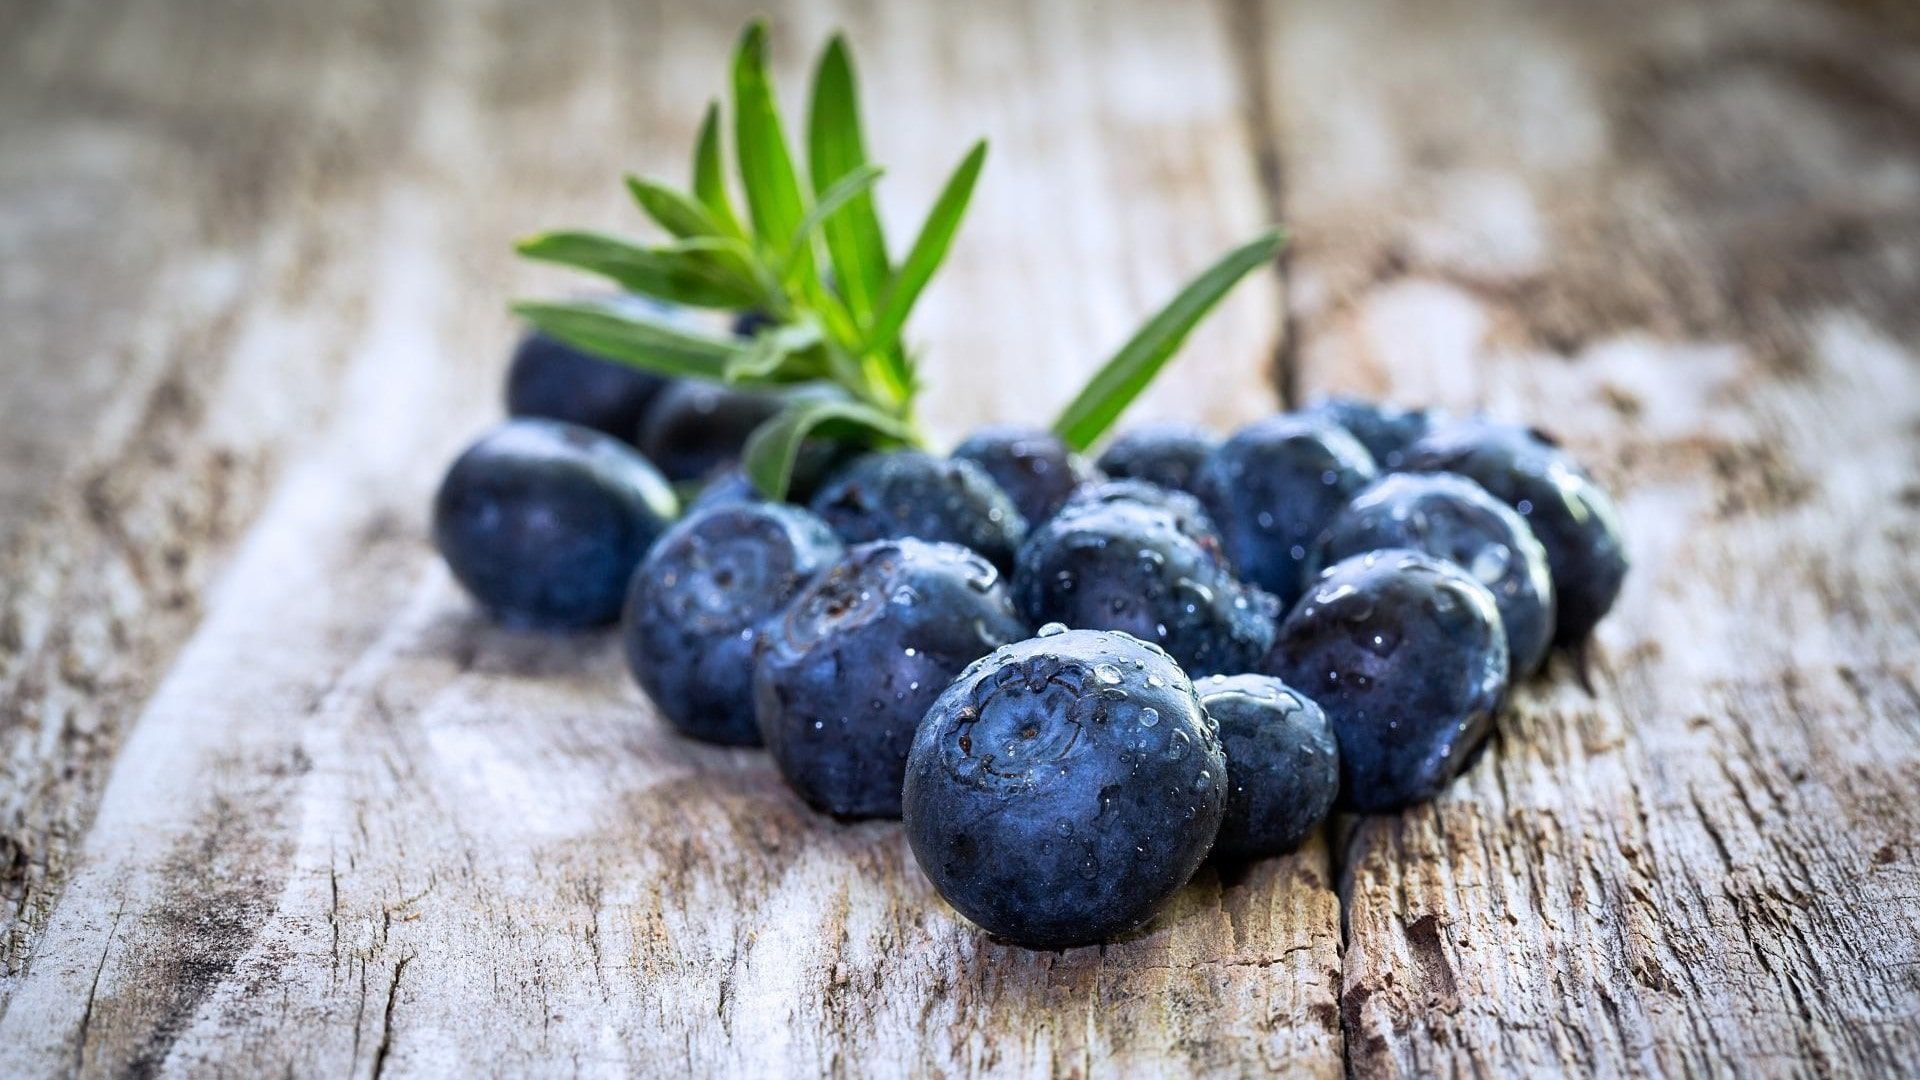 Huckleberry: Blueberries grow only in highly acidic and well-drained but moist soils. 1920x1080 Full HD Wallpaper.